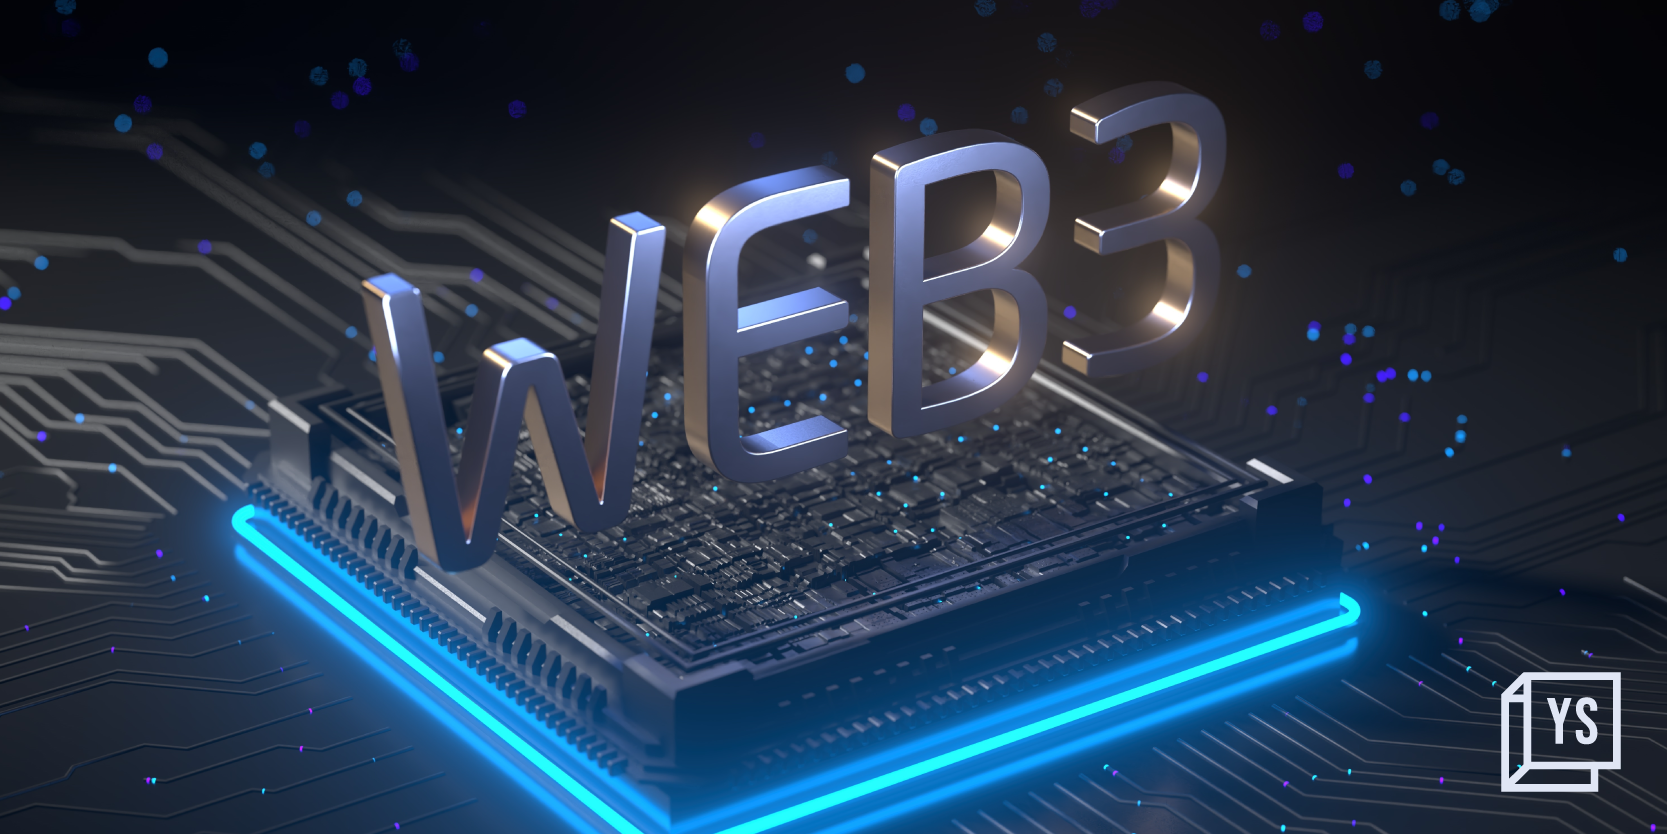 New to Web3? Here’s some basic Web3 lingo to get you started